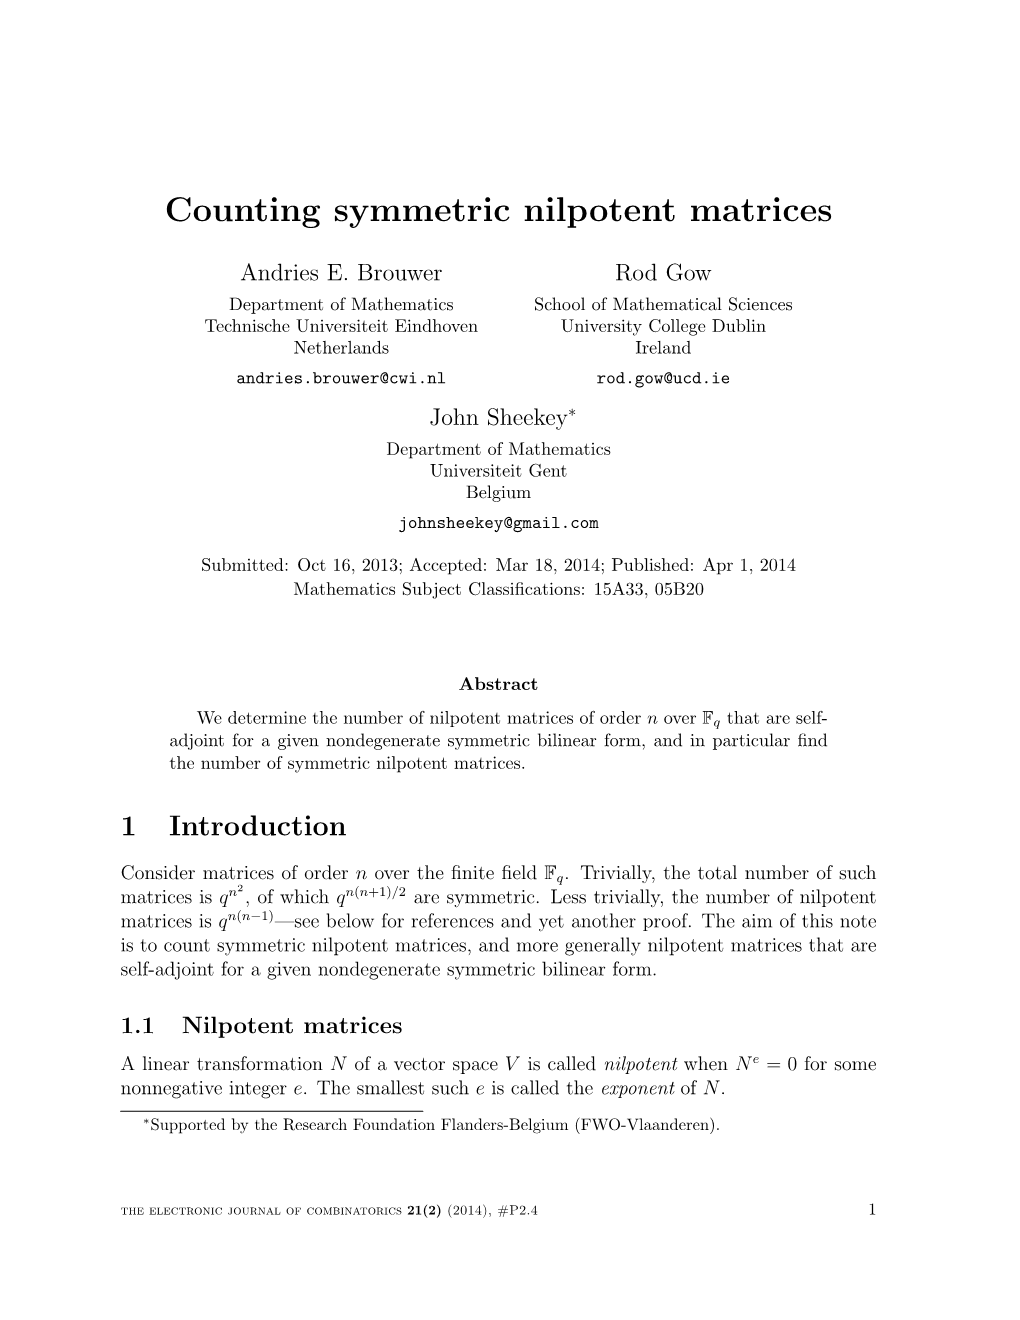 Counting Symmetric Nilpotent Matrices